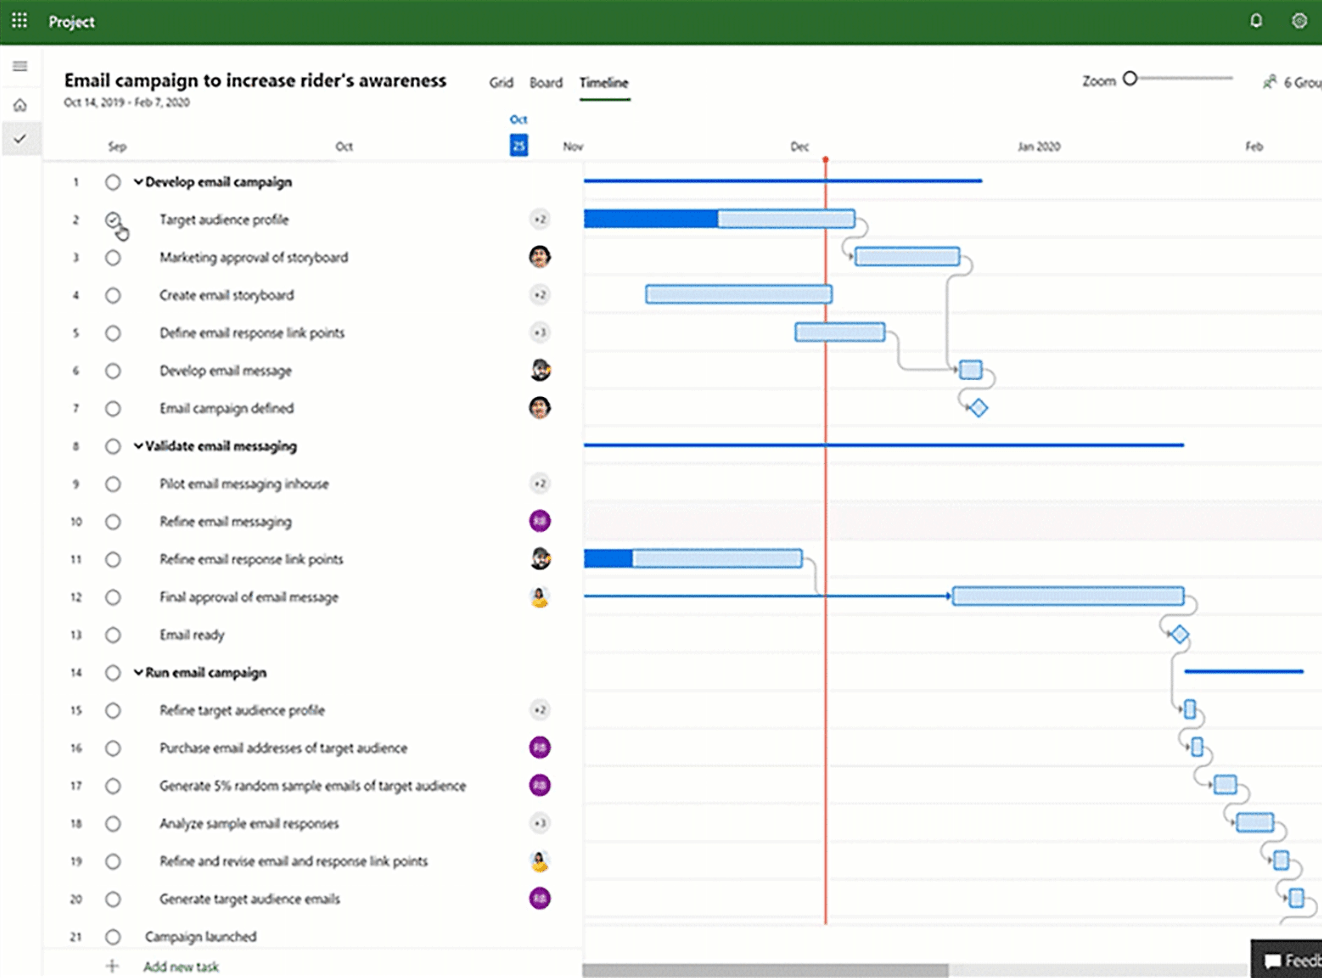 Example of using Gantt chart construction software tools in Microsoft Project